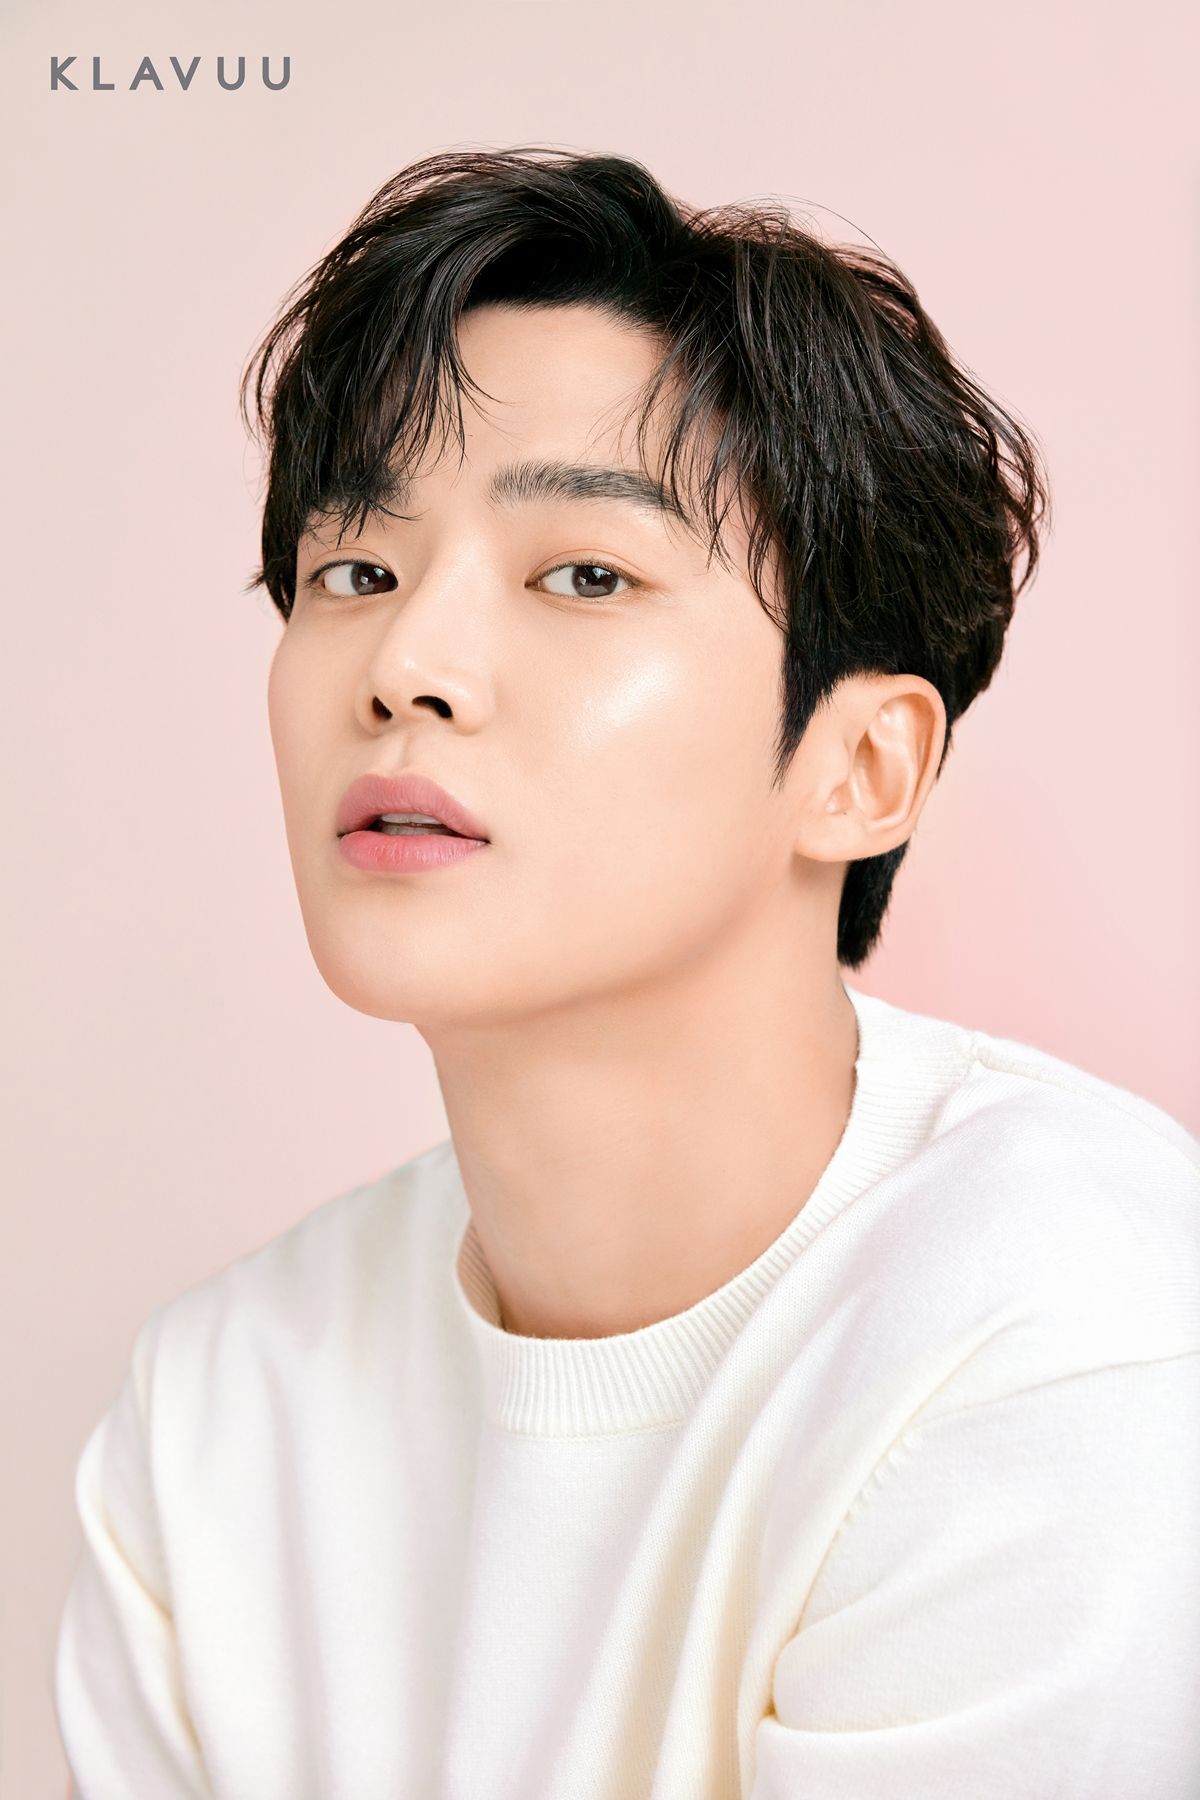 SF9's RoWoon Mesmerizes With Cute And Manly Vibes In Making Of KLAVUU Commercial. Kpopmap, Kdrama and Trend Stories Coverage